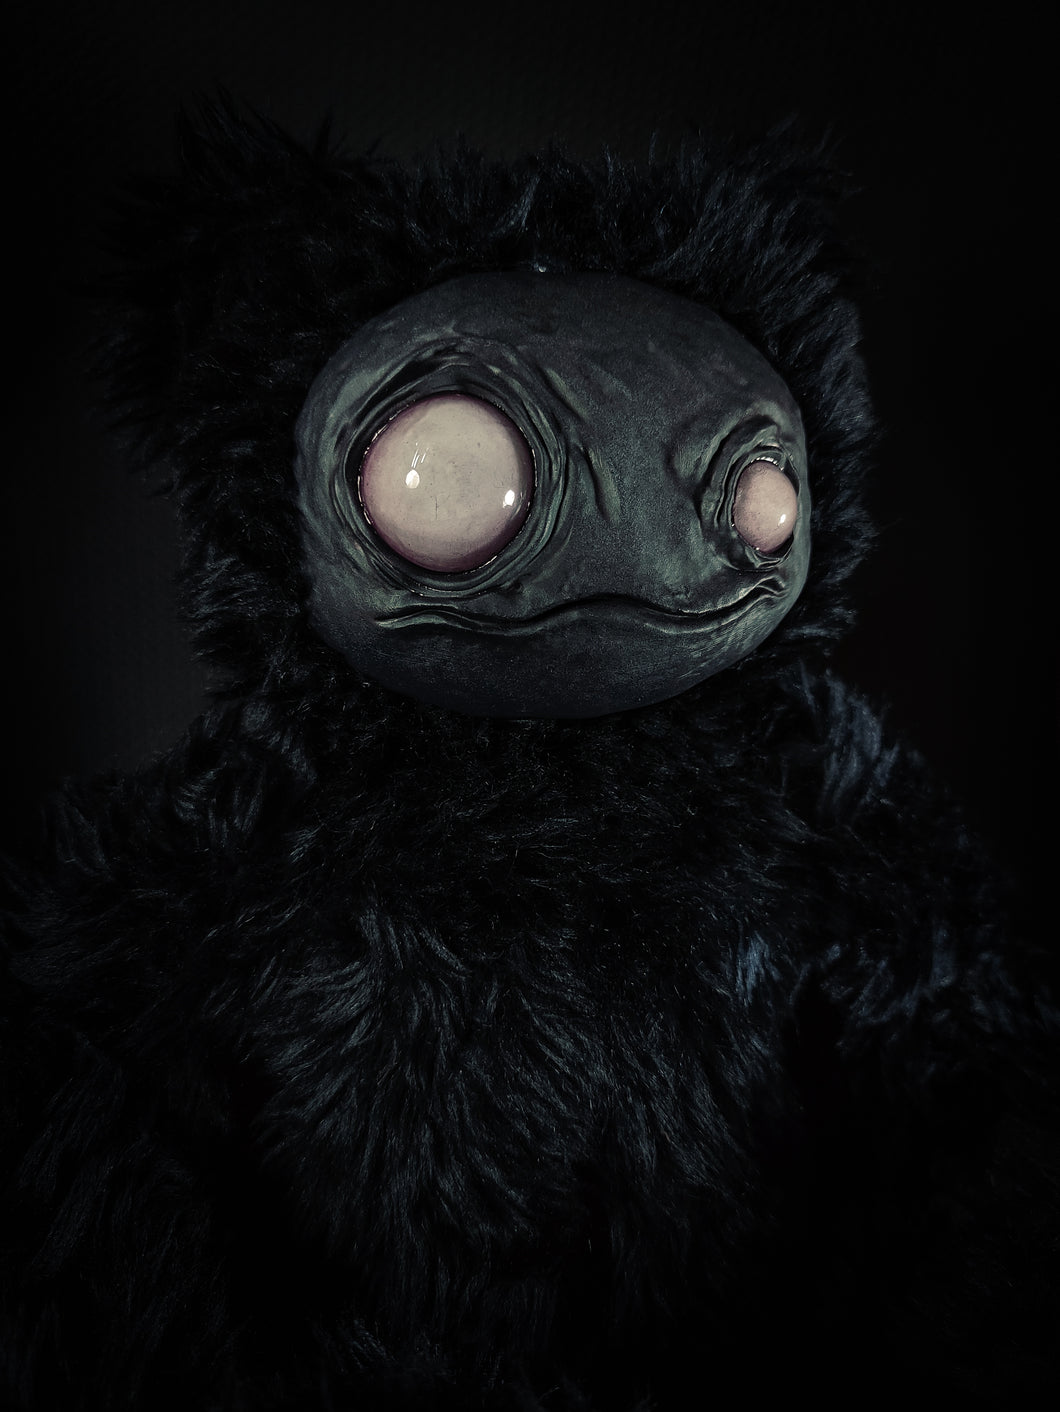 Zippo (Lights Out Ver.) - Monster Art Doll Plush Toy